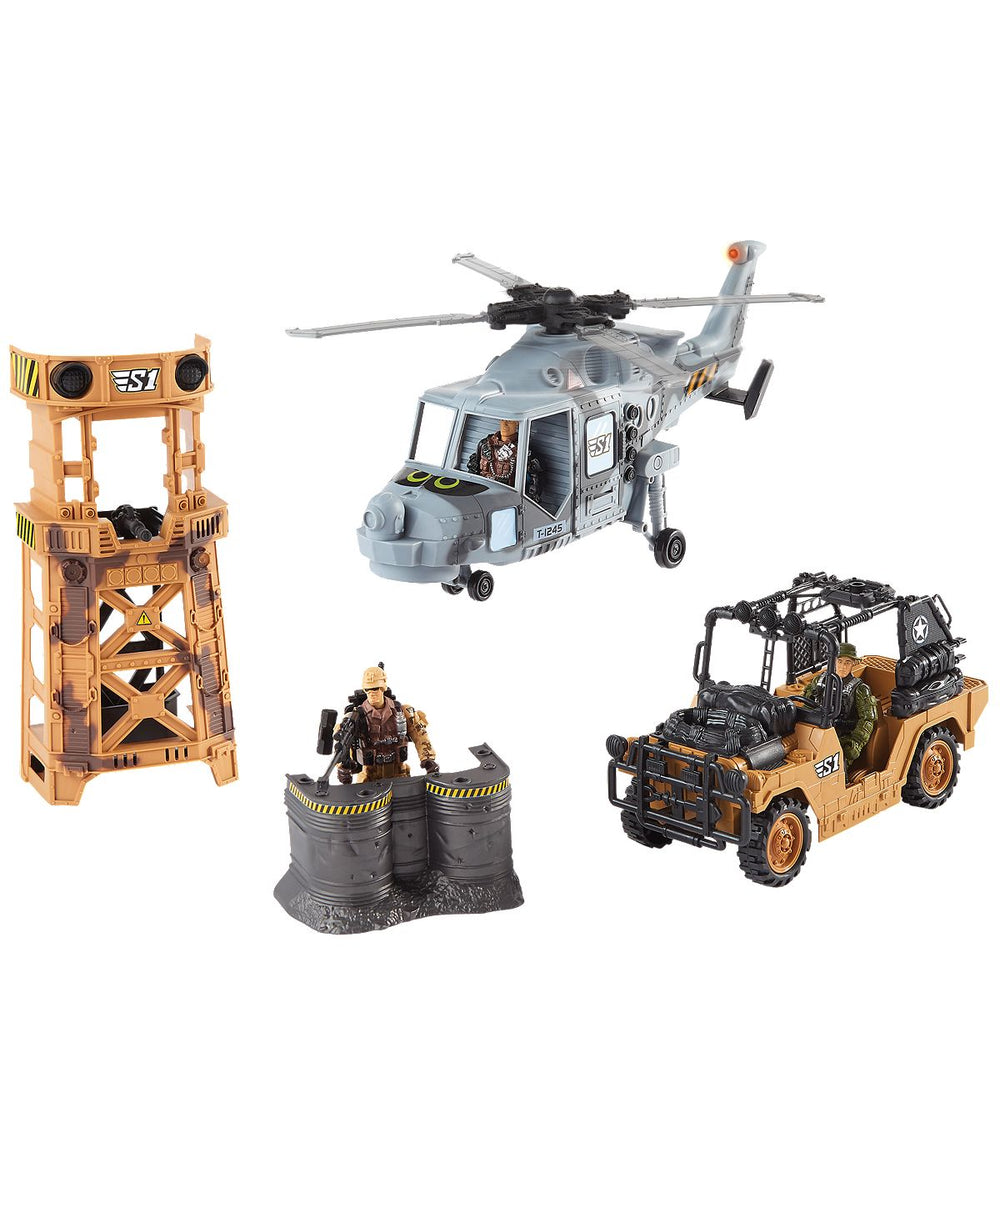 True Heroes Military-Inspired Playset with Tower and Vehicles - Toys R Us Exclusive